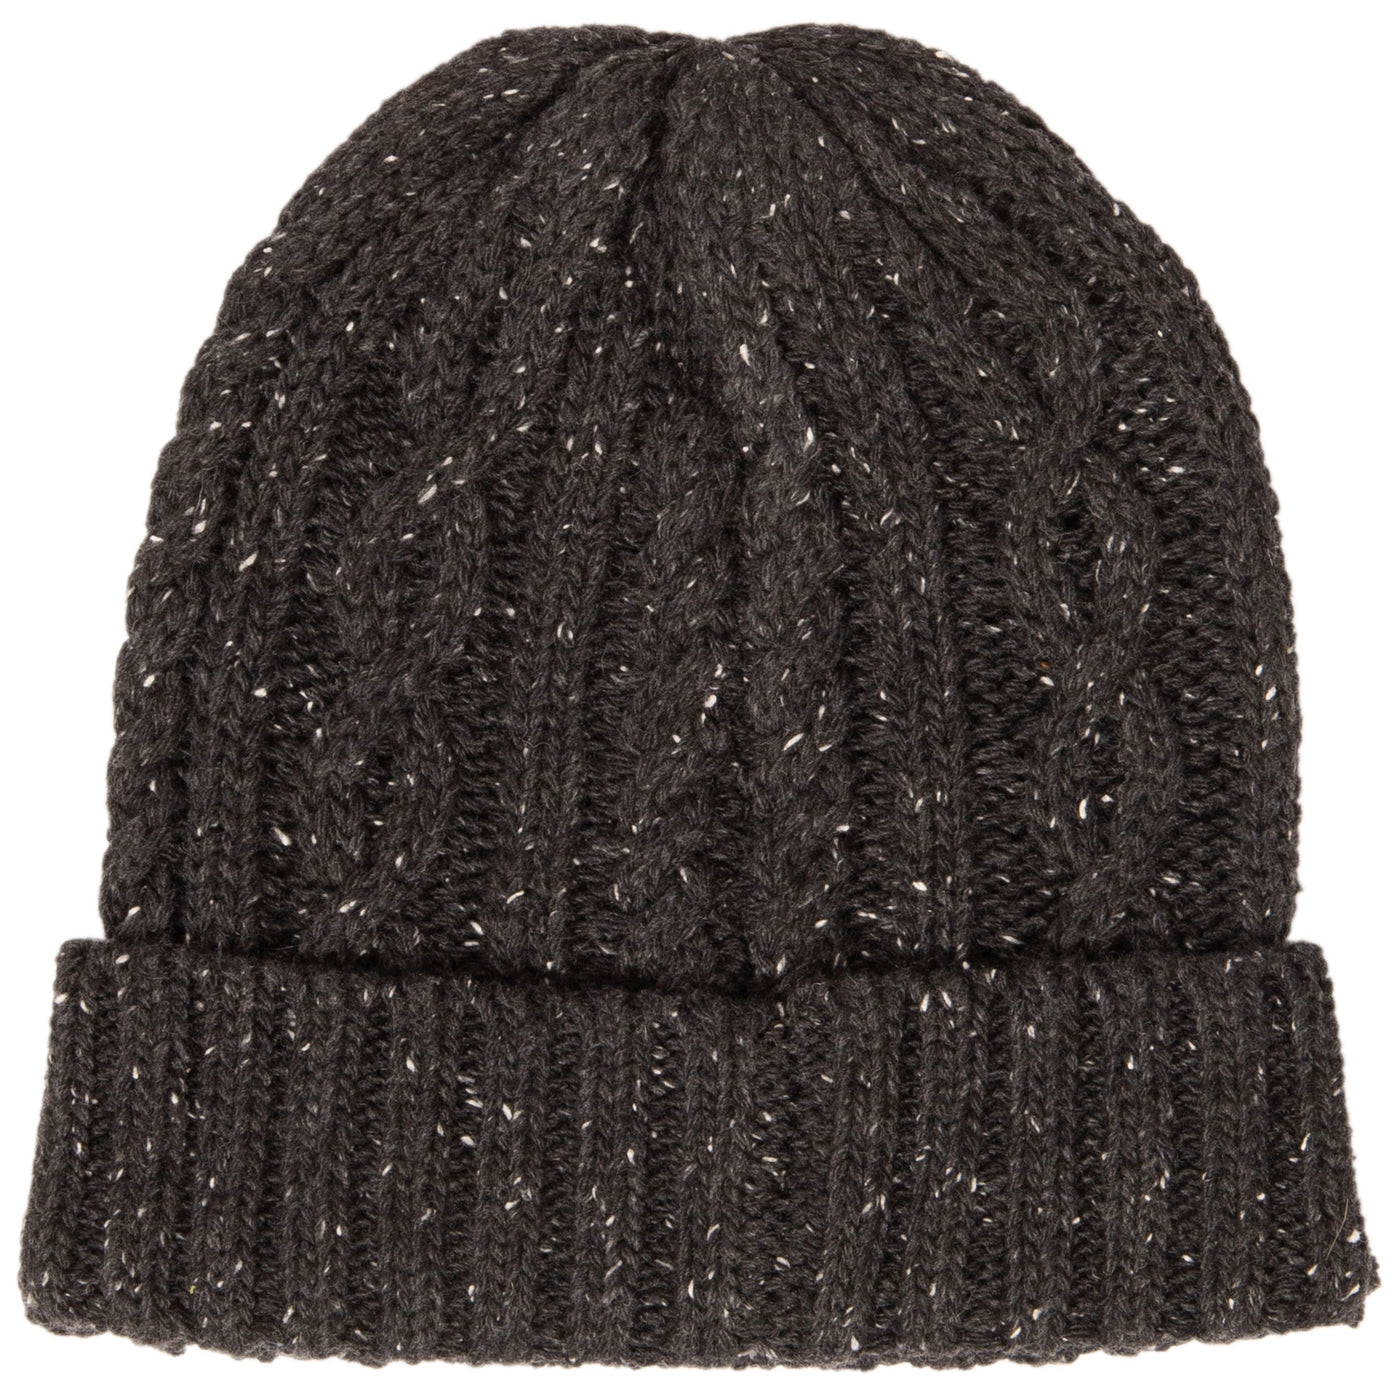 Men\'s Wool Blend Cable Knit Cuffed Beanie – San Diego Hat Company